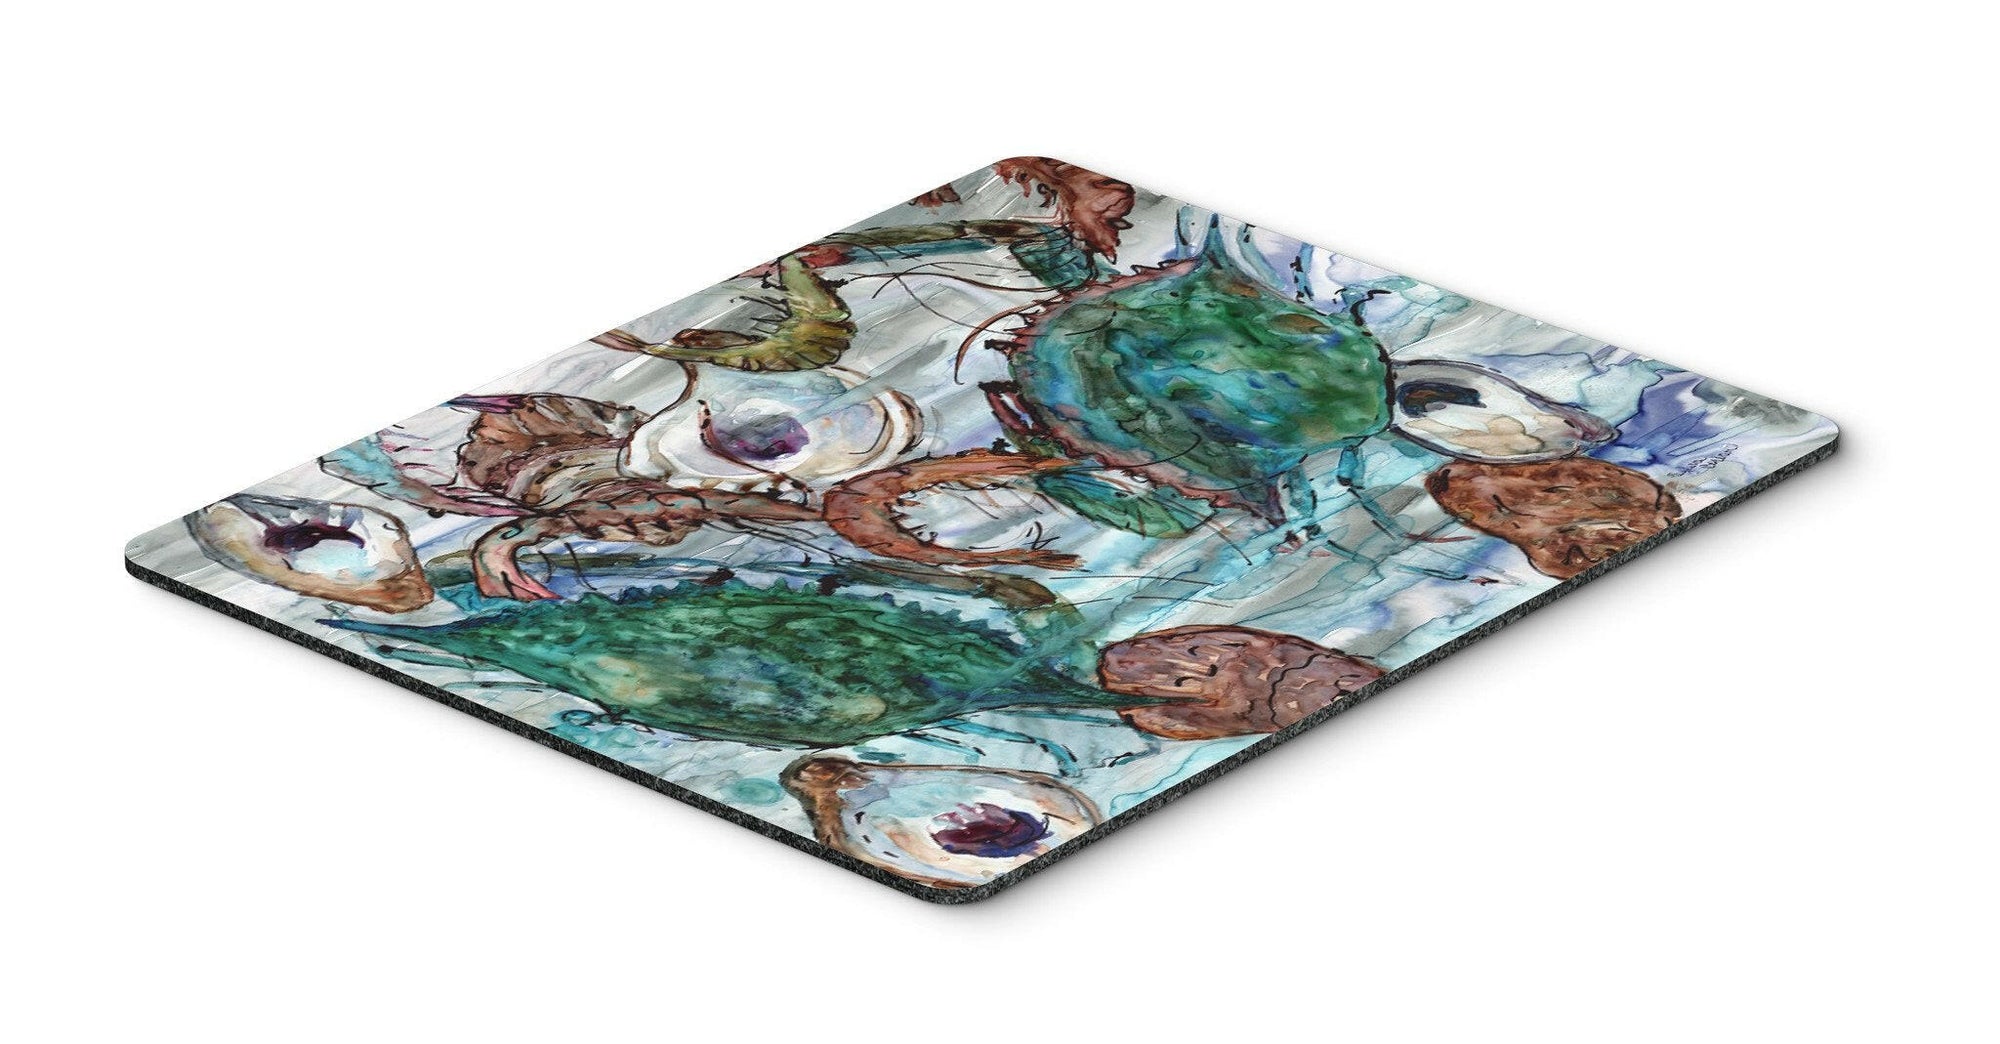 Shrimp, Crabs and Oysters in water Mouse Pad, Hot Pad or Trivet 8965MP by Caroline's Treasures